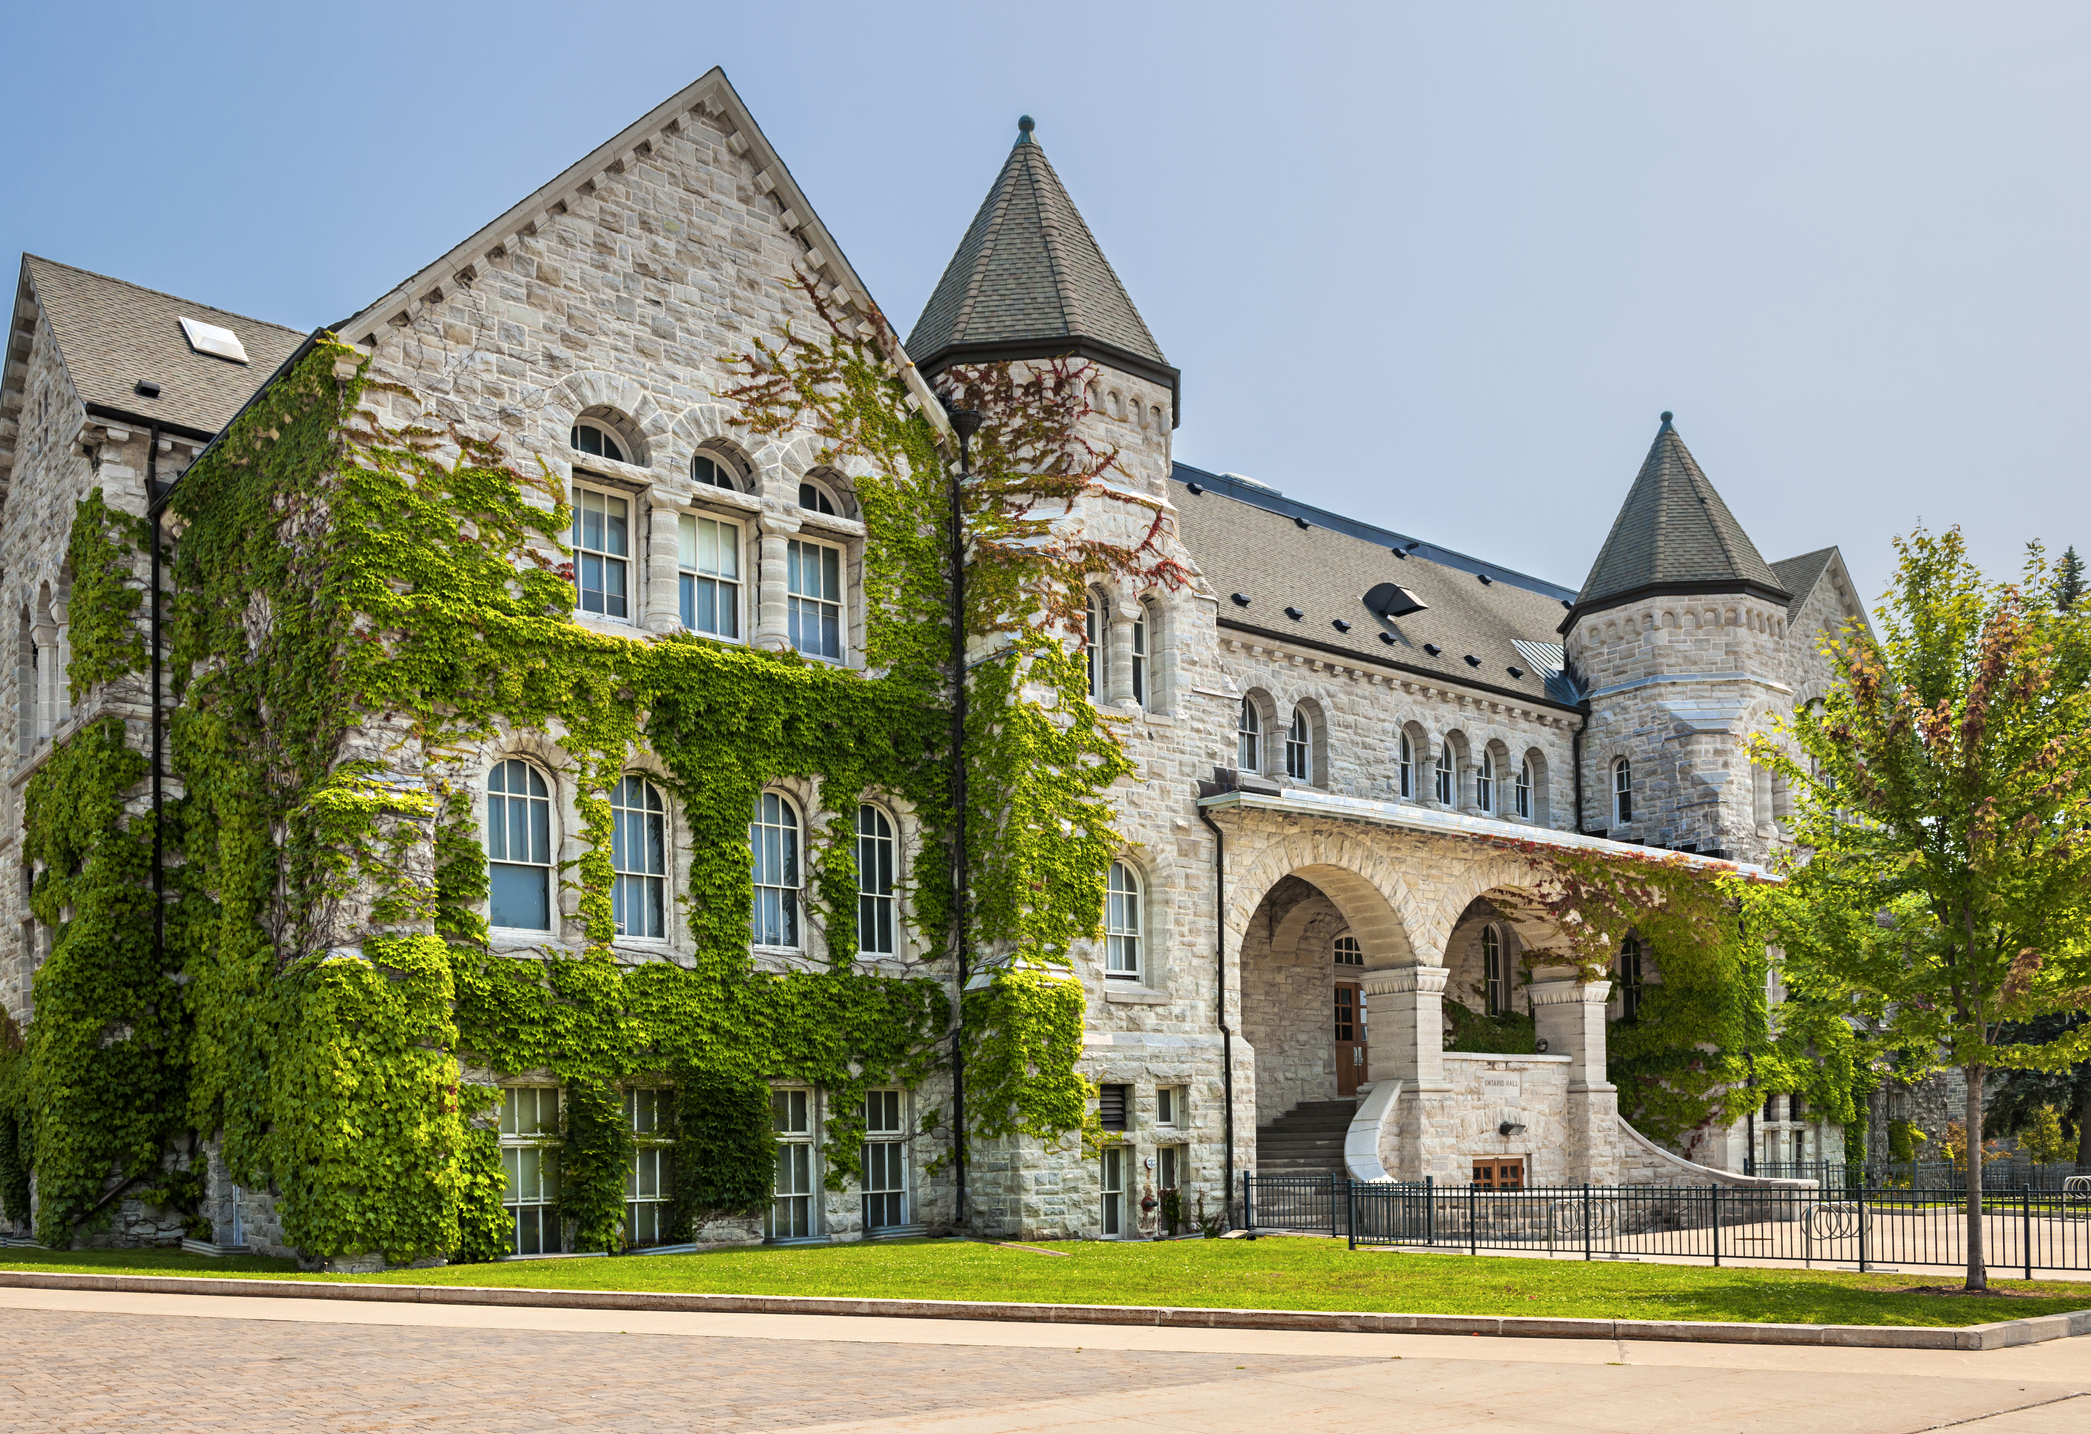 50 Most Beautiful College Campuses - Prettiest College Campuses